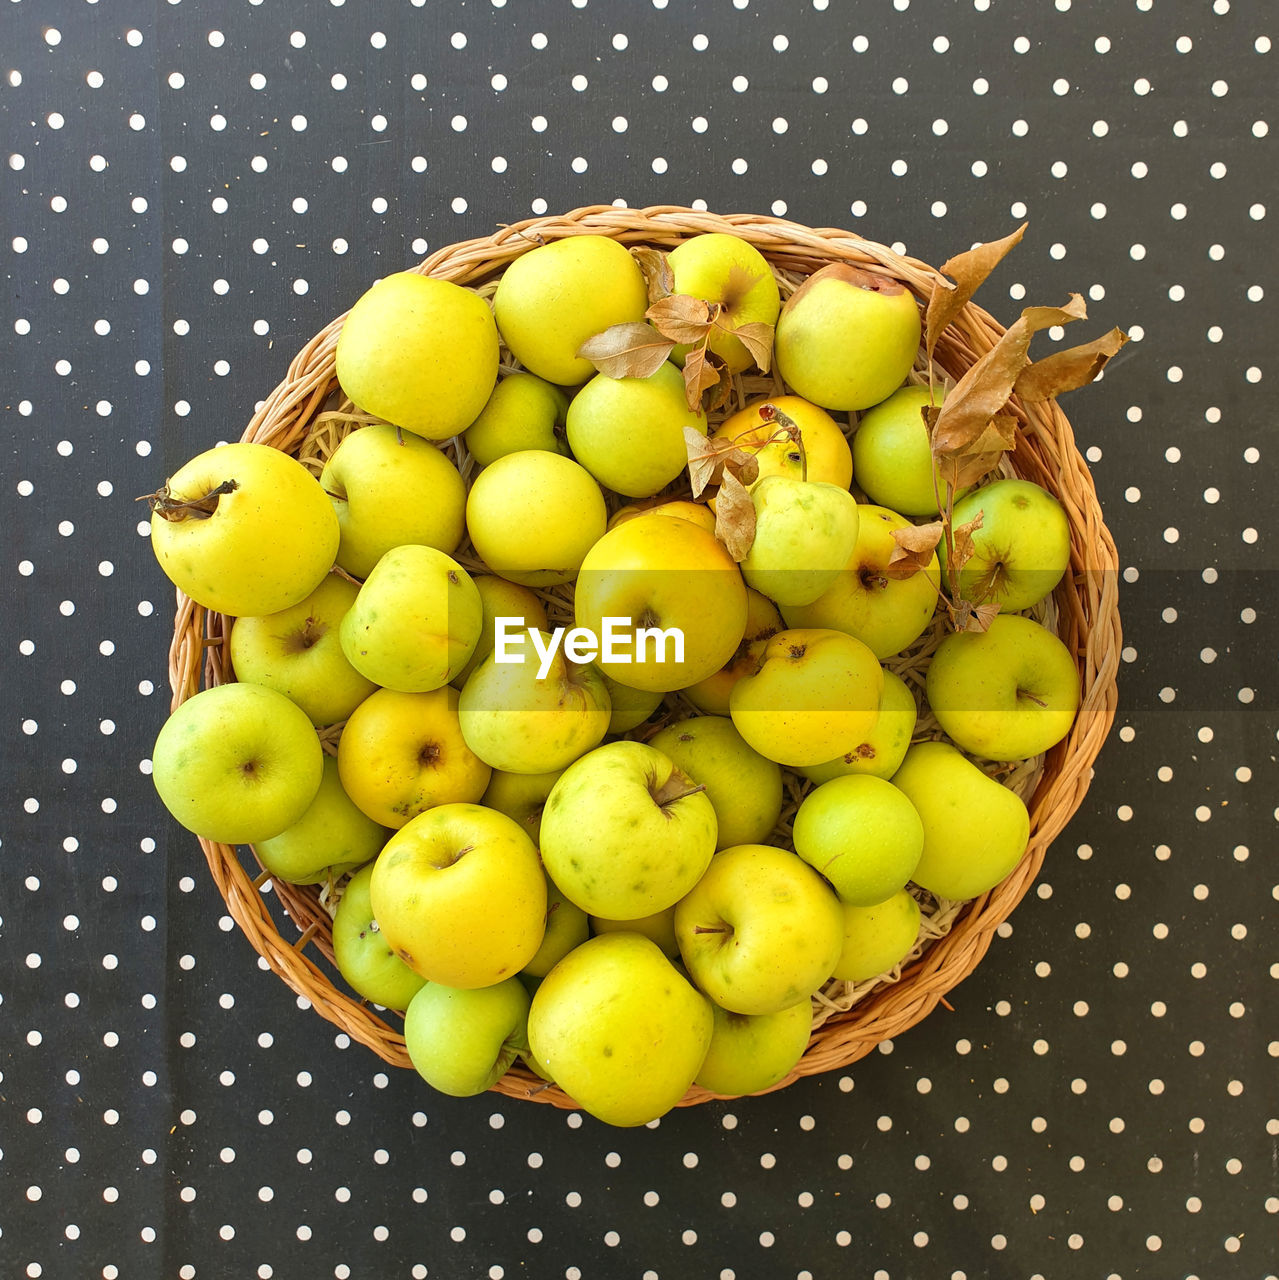 Fresh green apples in round basket on polka dot tablecloth